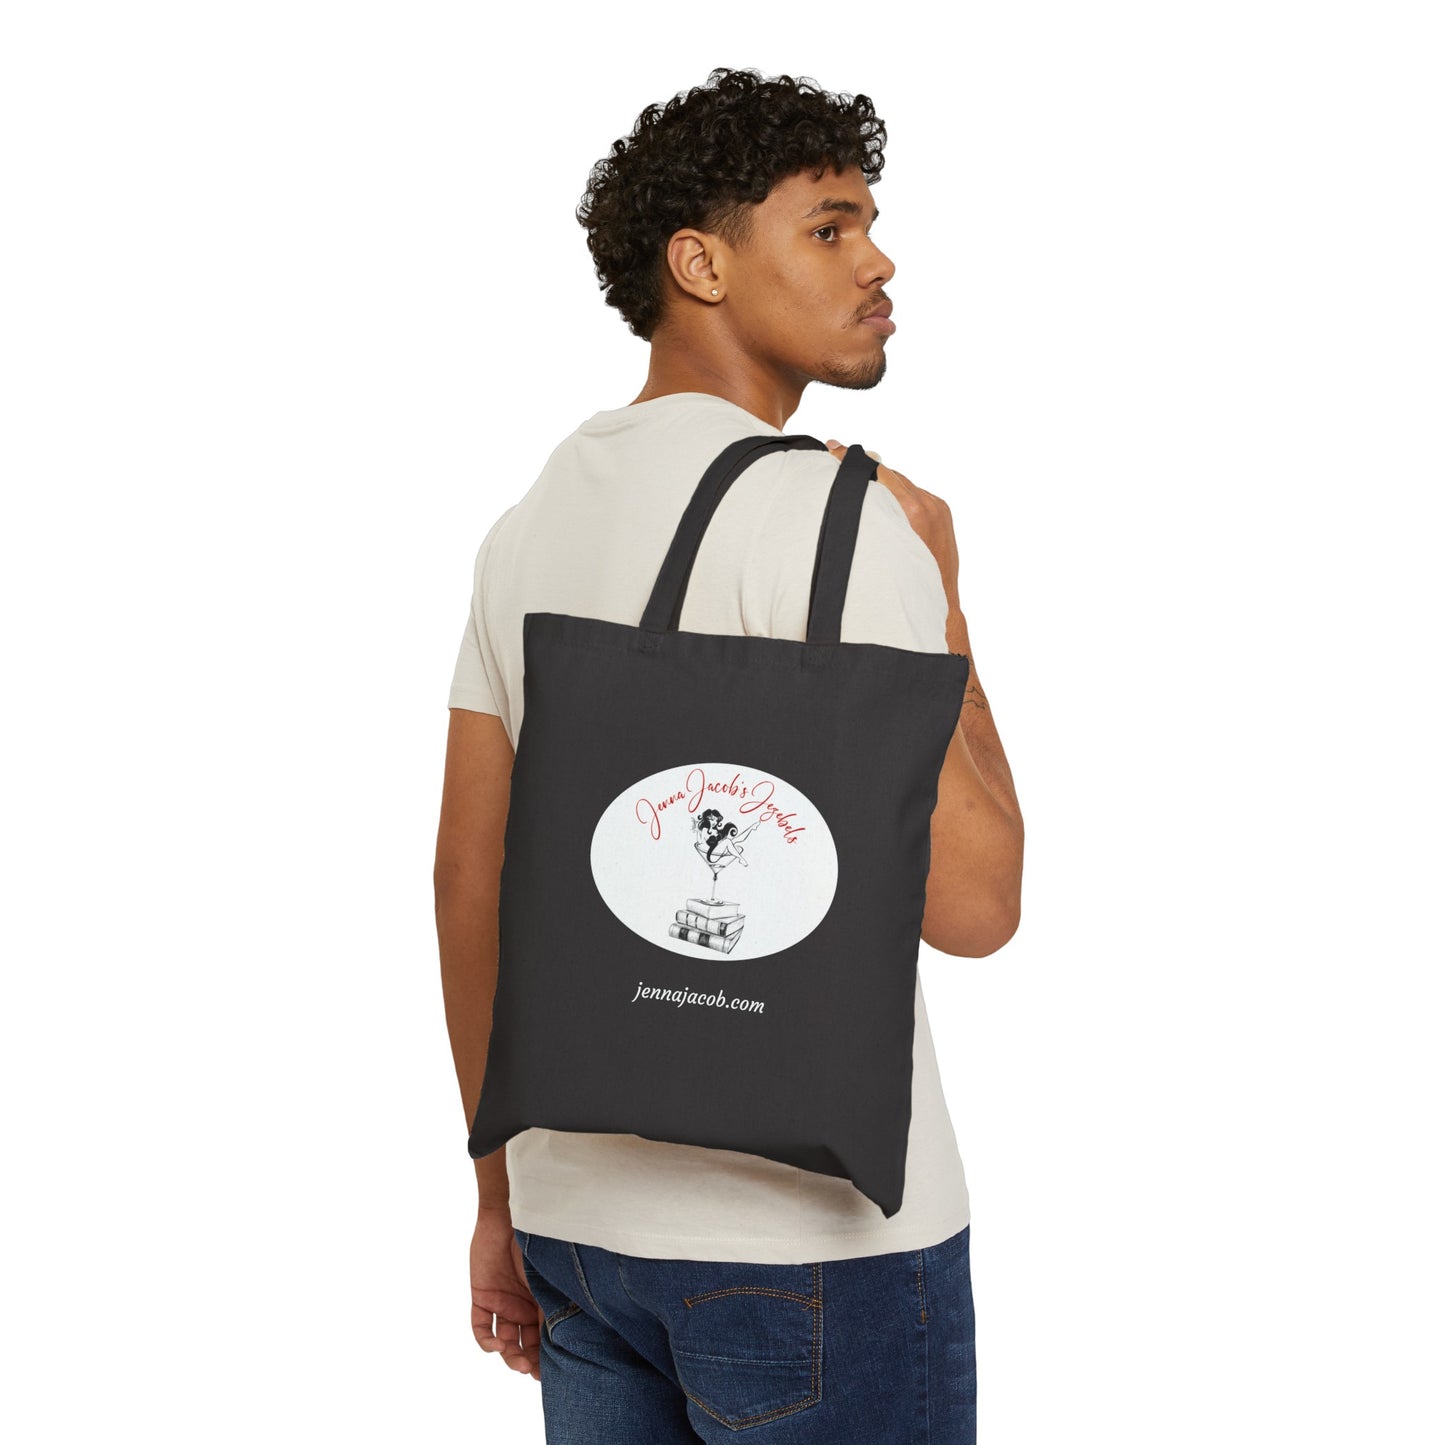 Jezebel Party Girl Cotton Canvas Tote Bag